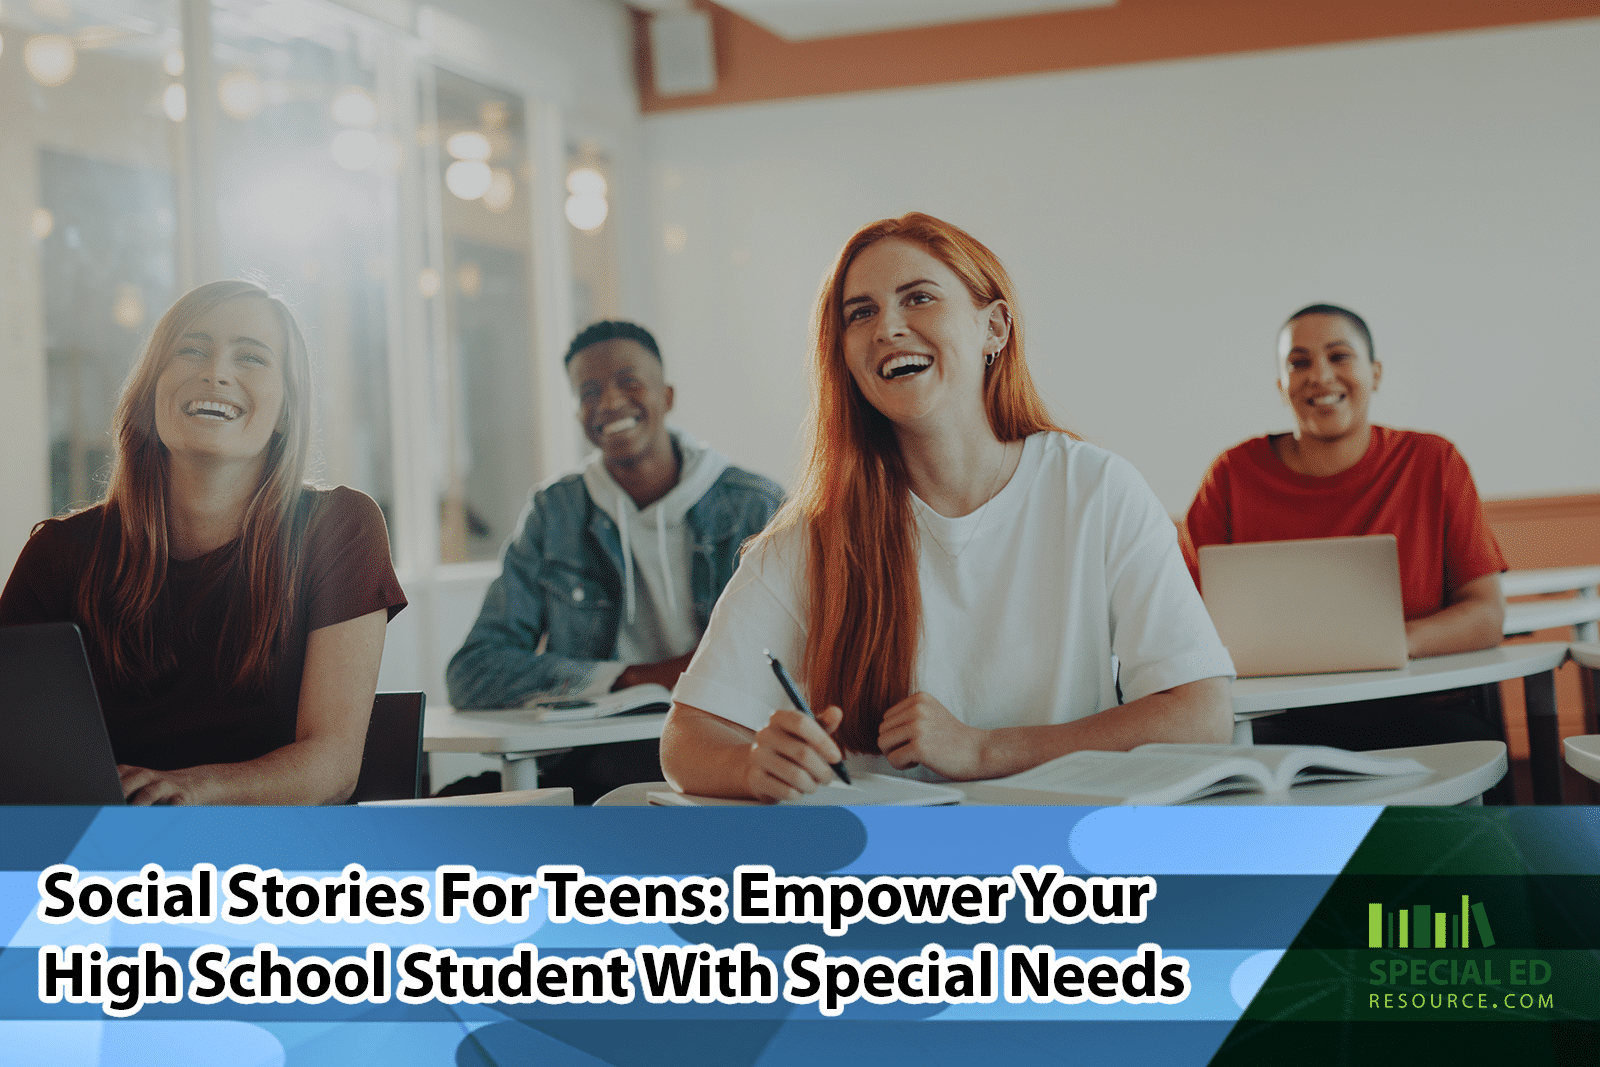 A high school classroom where the teacher is using social stories for teens to help students with social skills and communication.